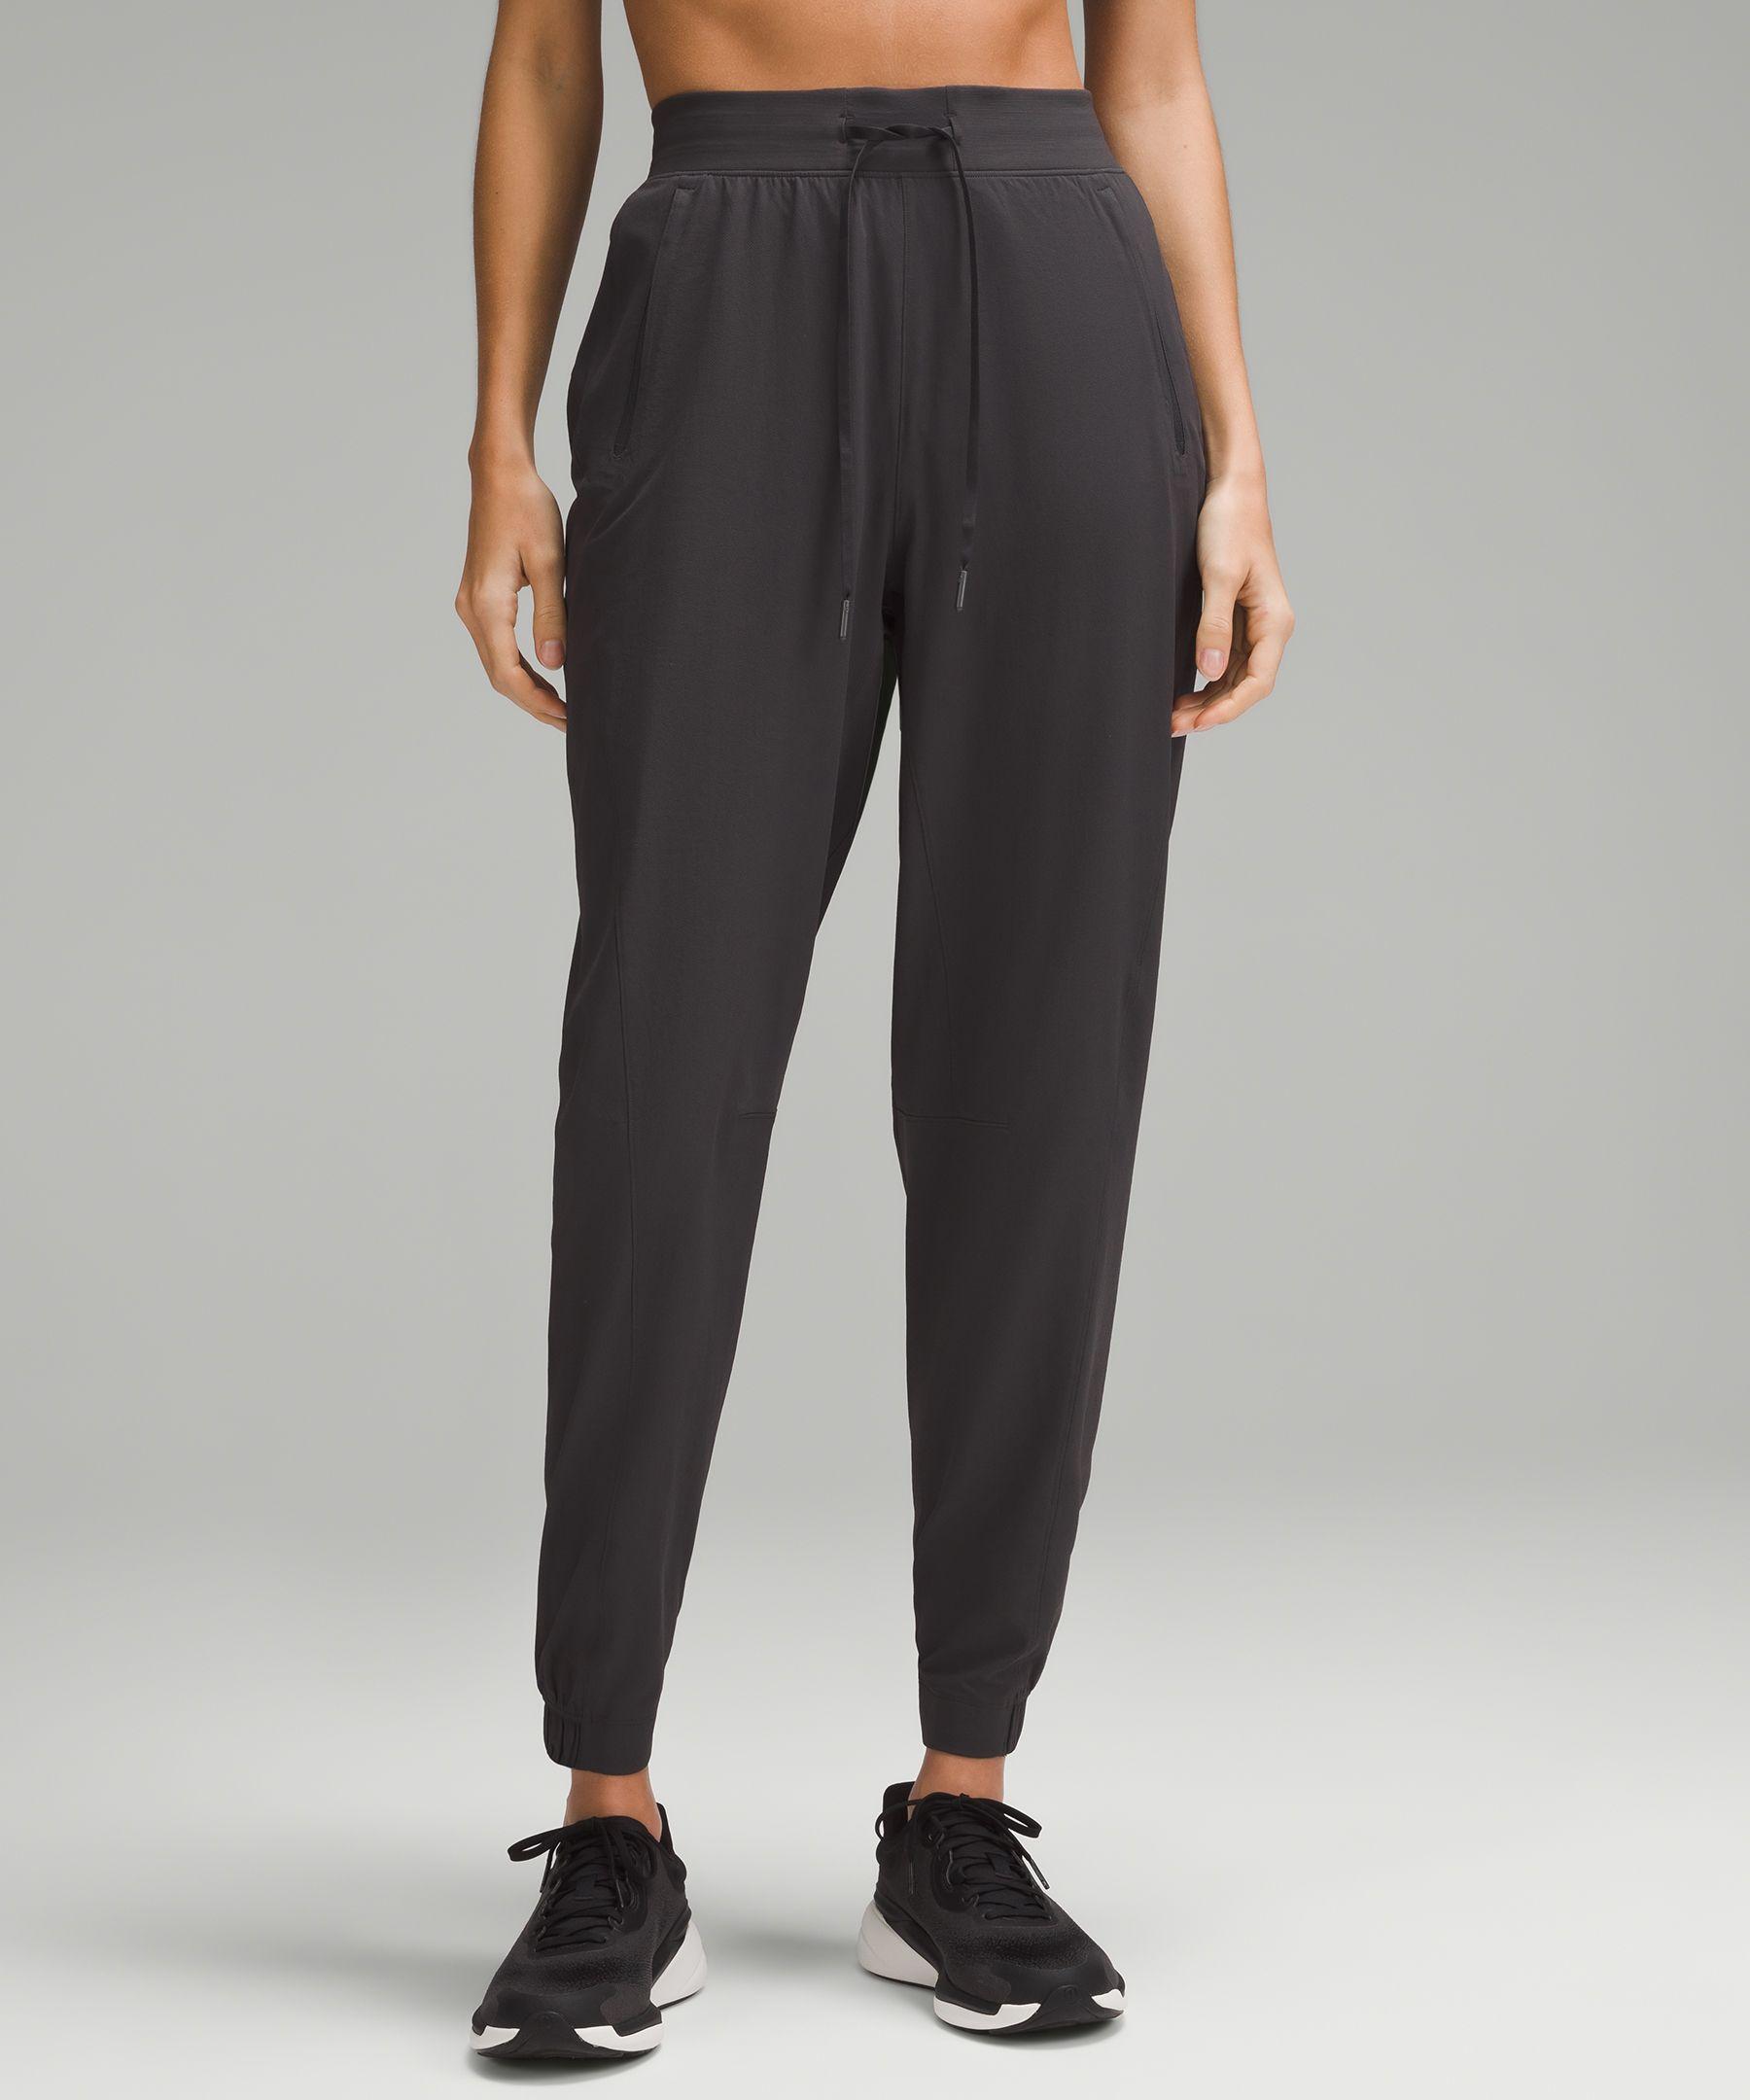 lululemon athletica License To Train High-rise Pants in Black